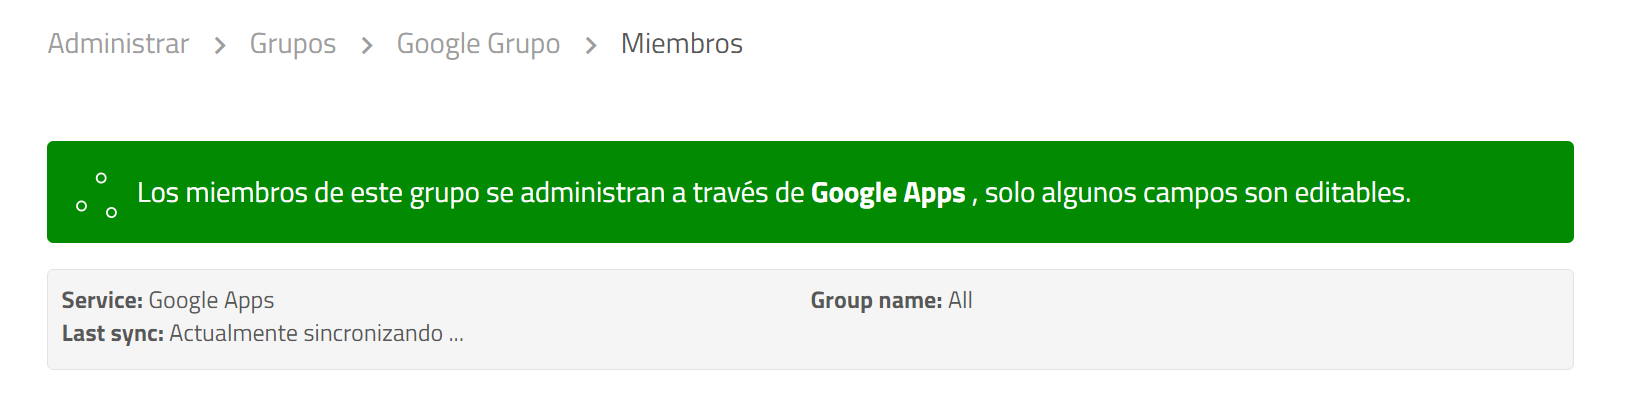 Additional information about the Google Suite synced group